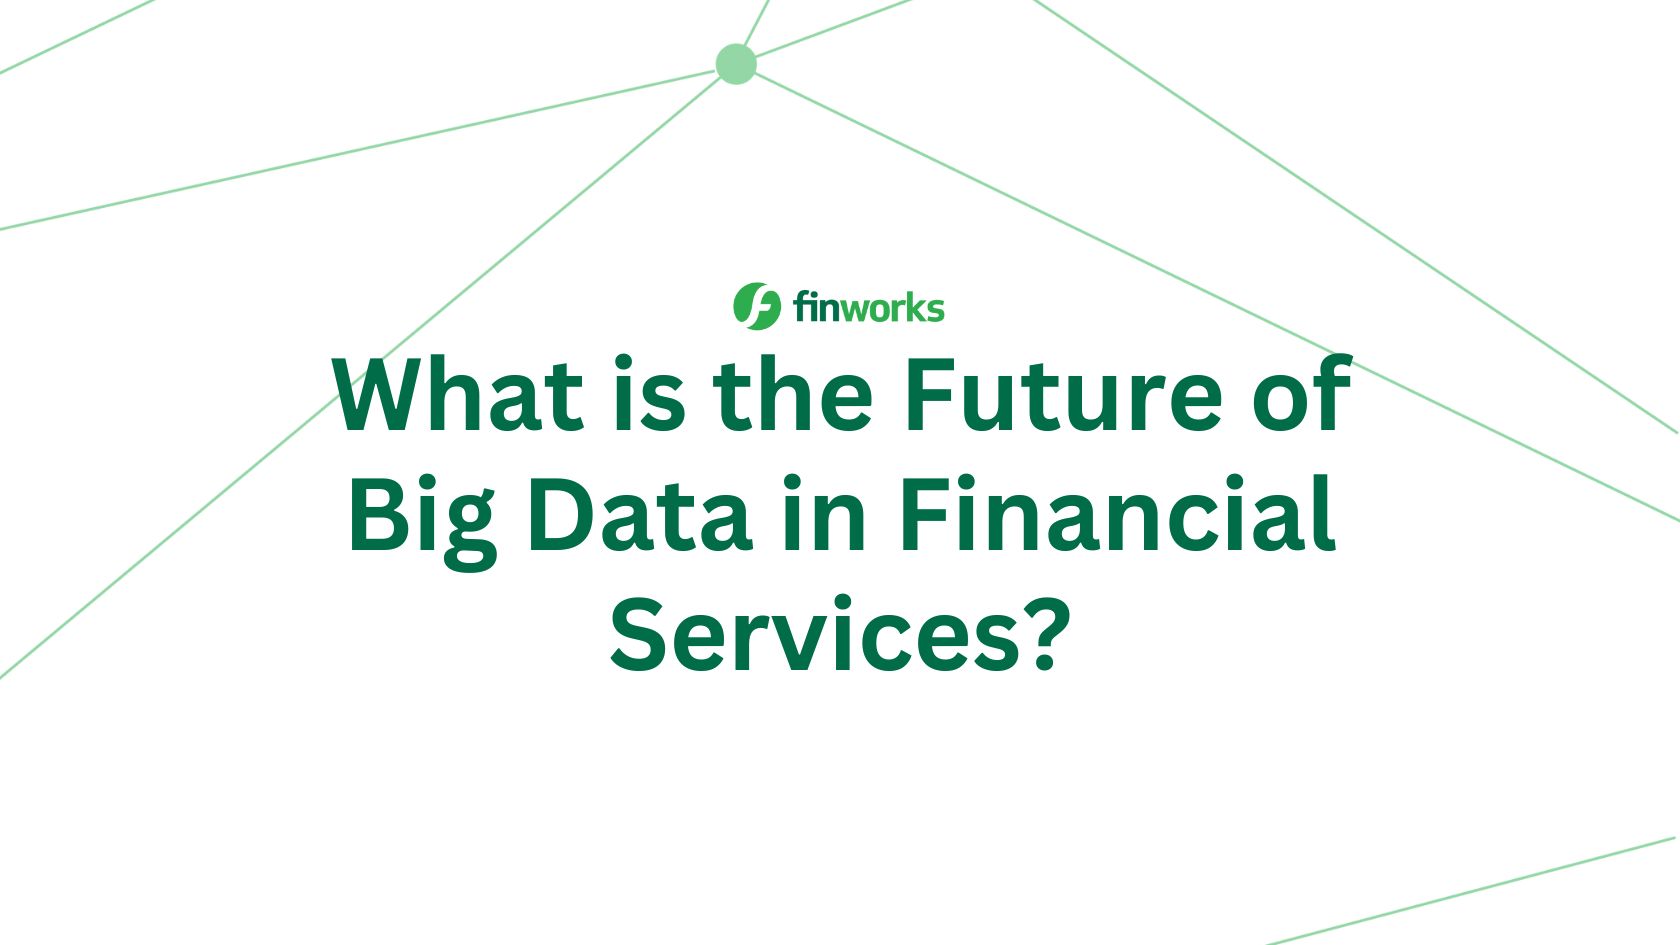 What is the Future of Big Data in Financial Services?